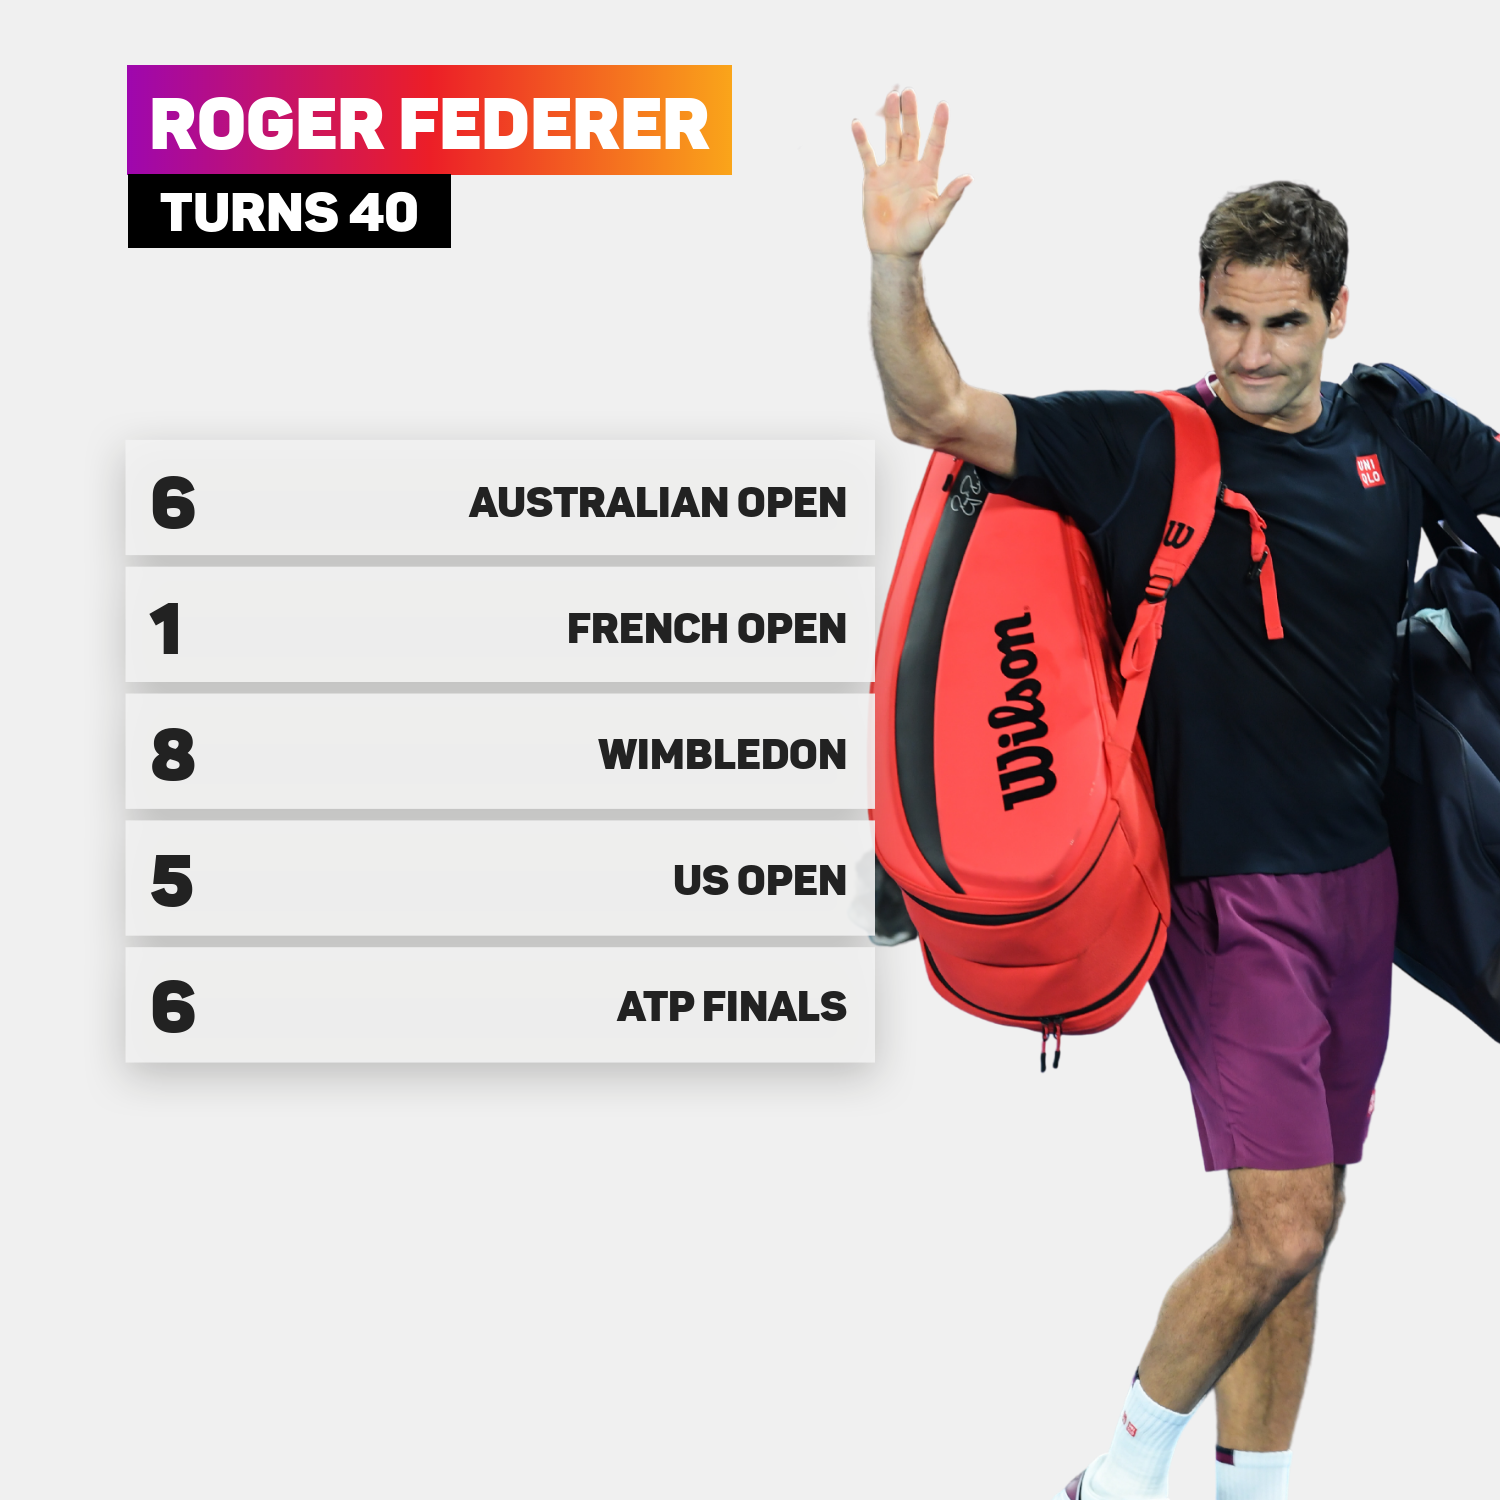 Roger Federer is one of the all-time greats